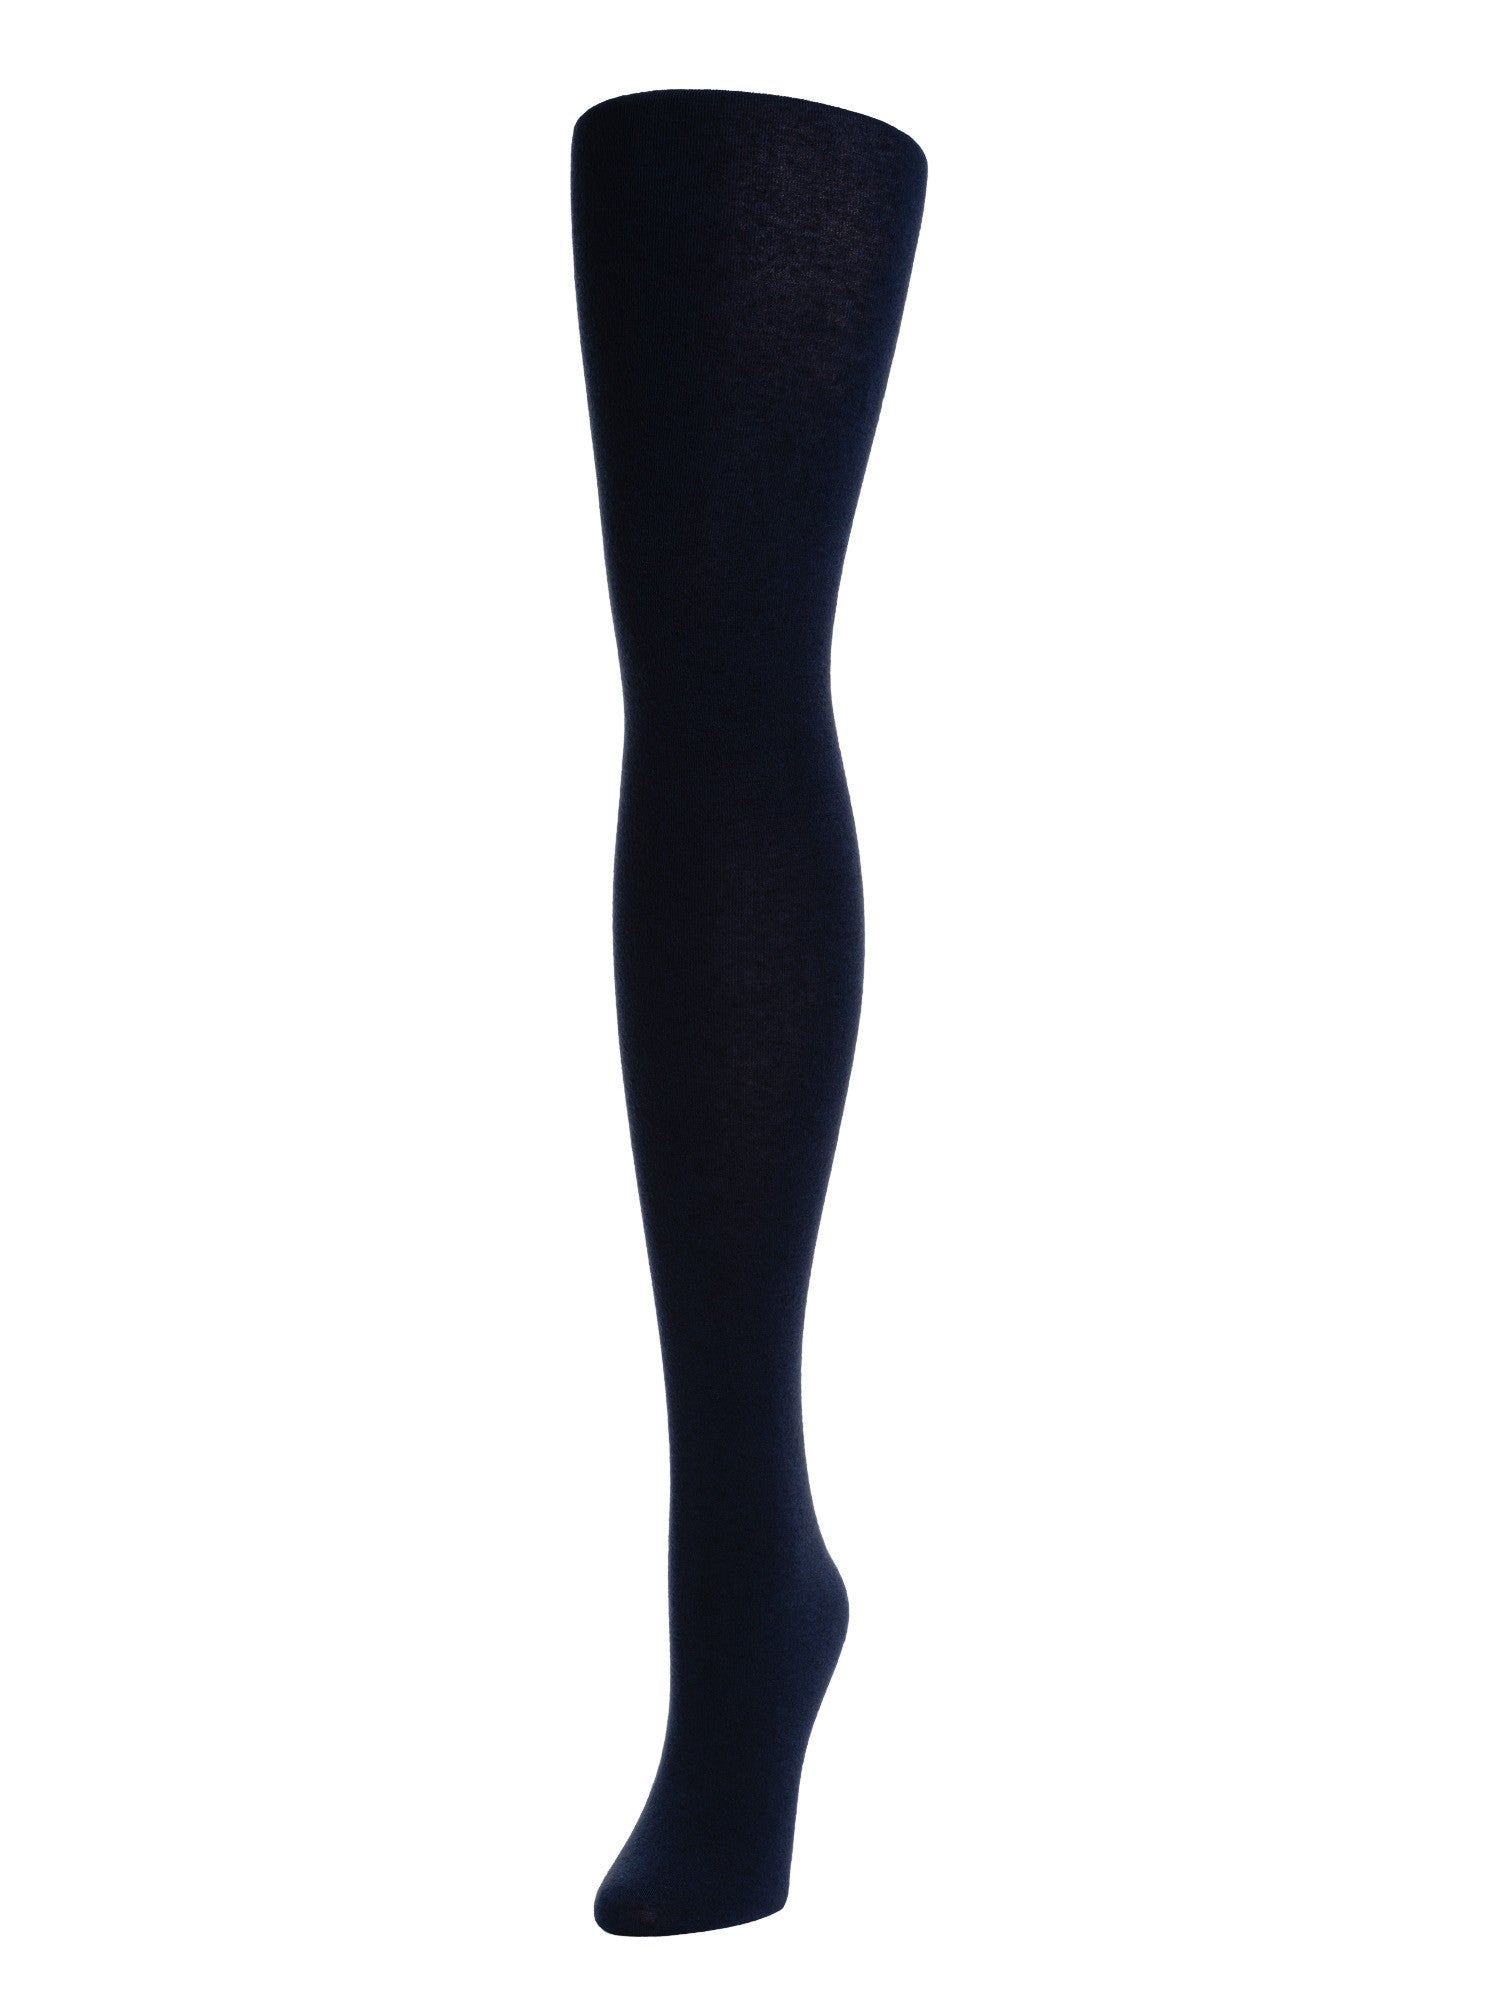 All Woman Cashmere Tights - The Big Tights Company